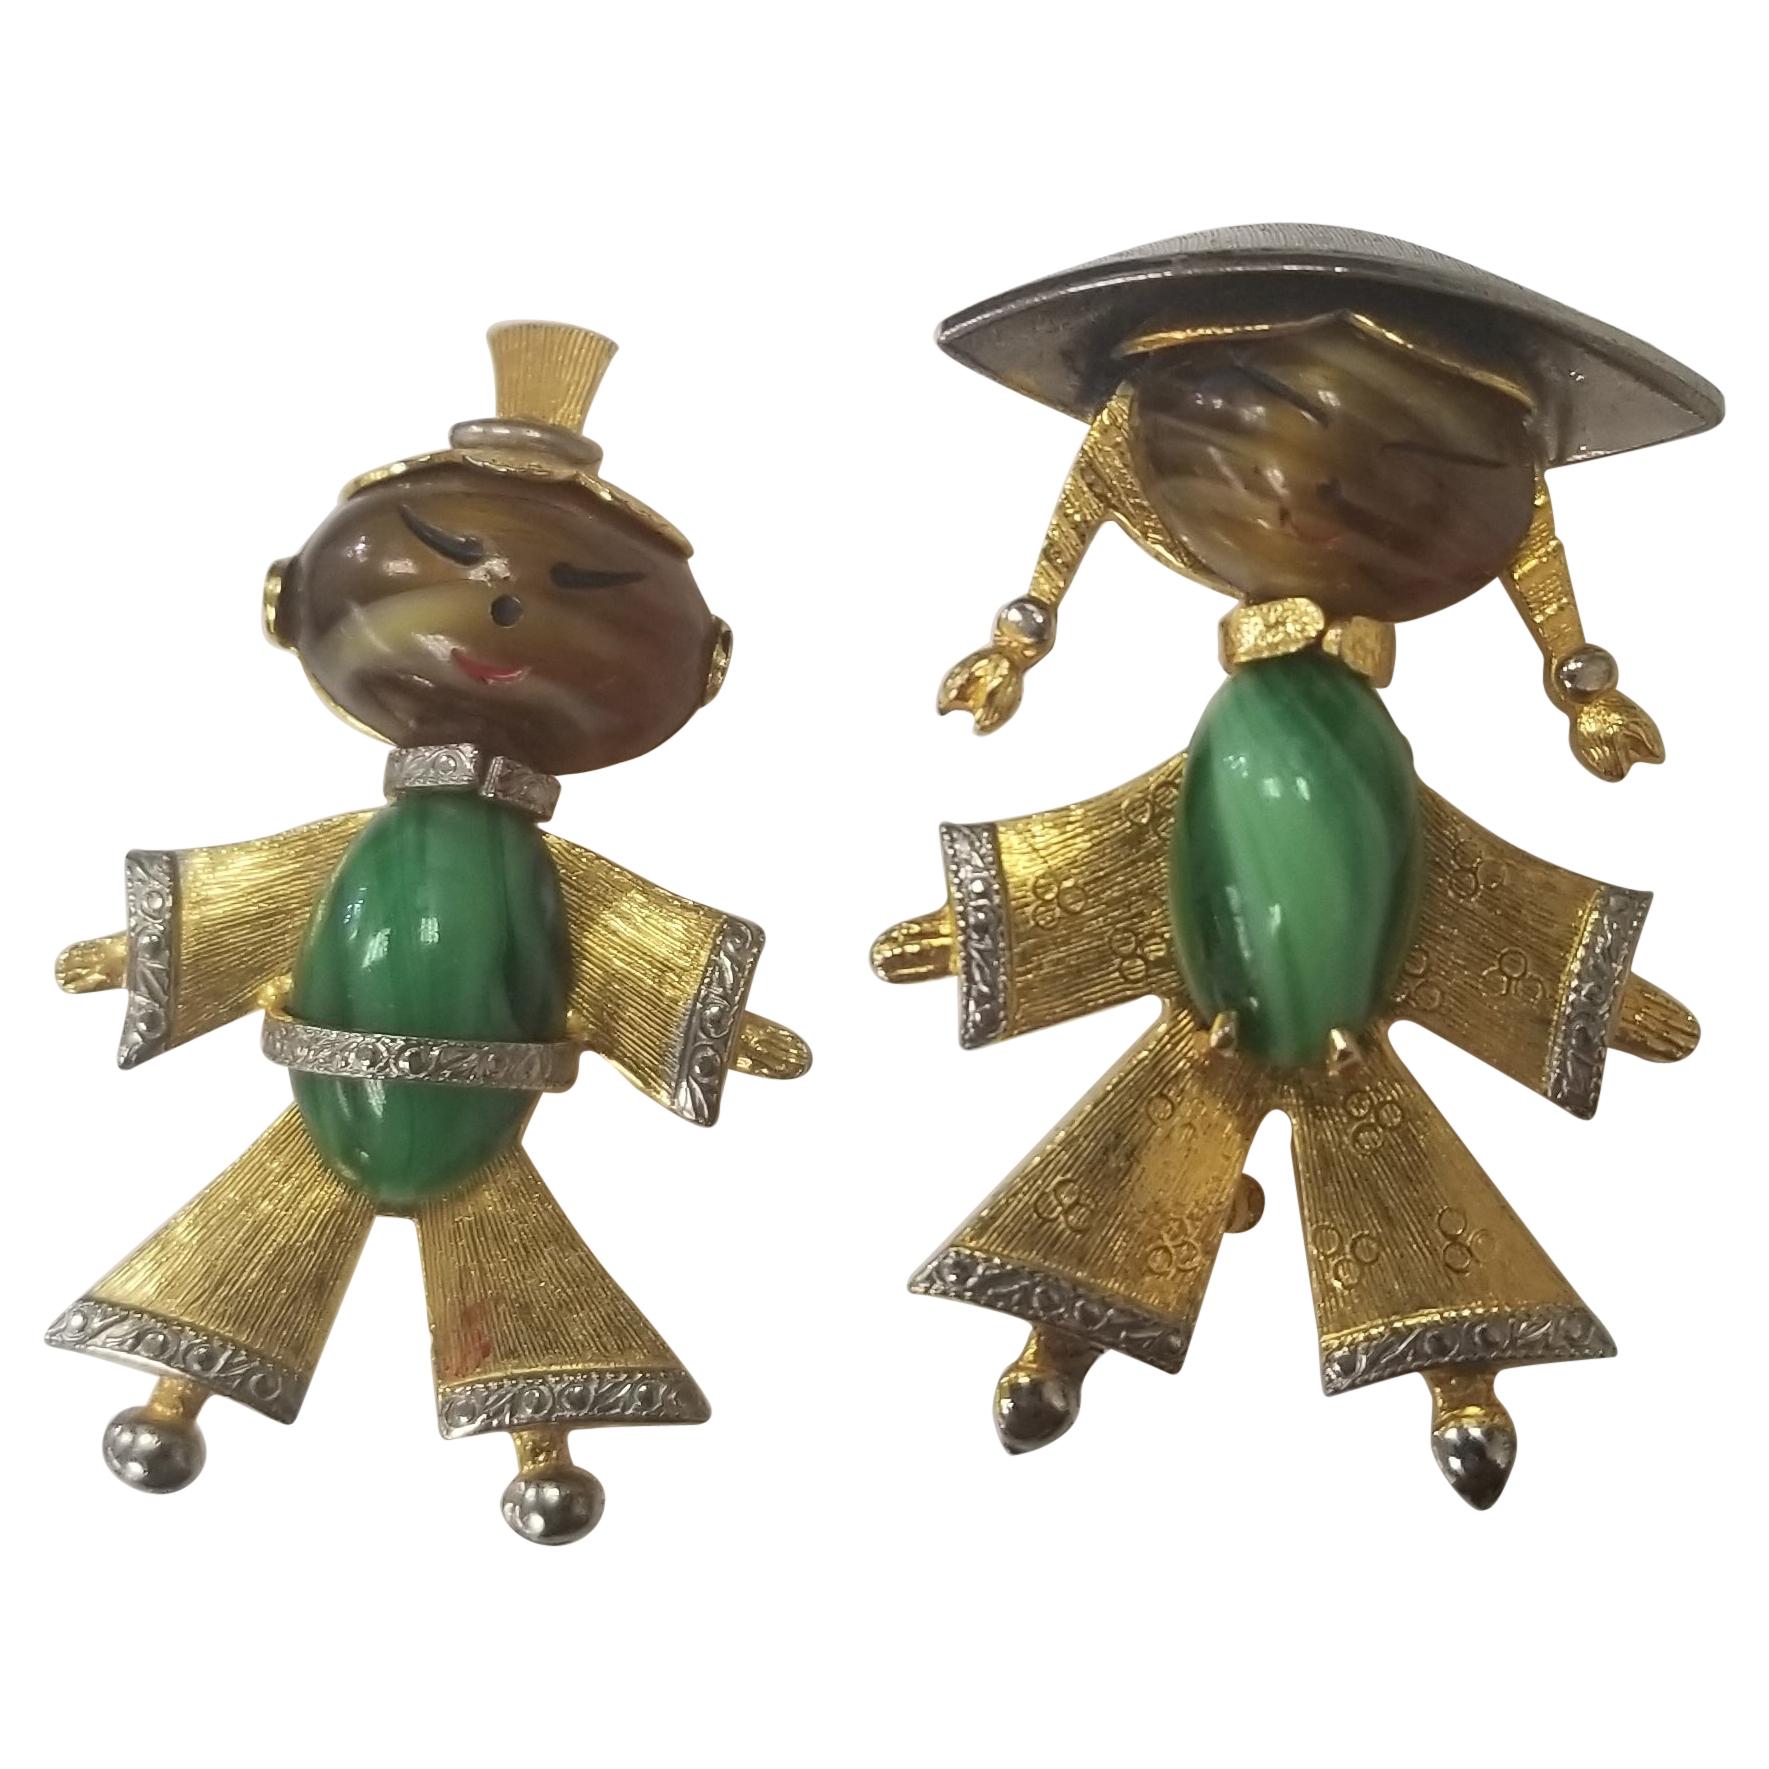 These Wonderful Vintage Pins, Feature the Design of an Asian Lady and Man